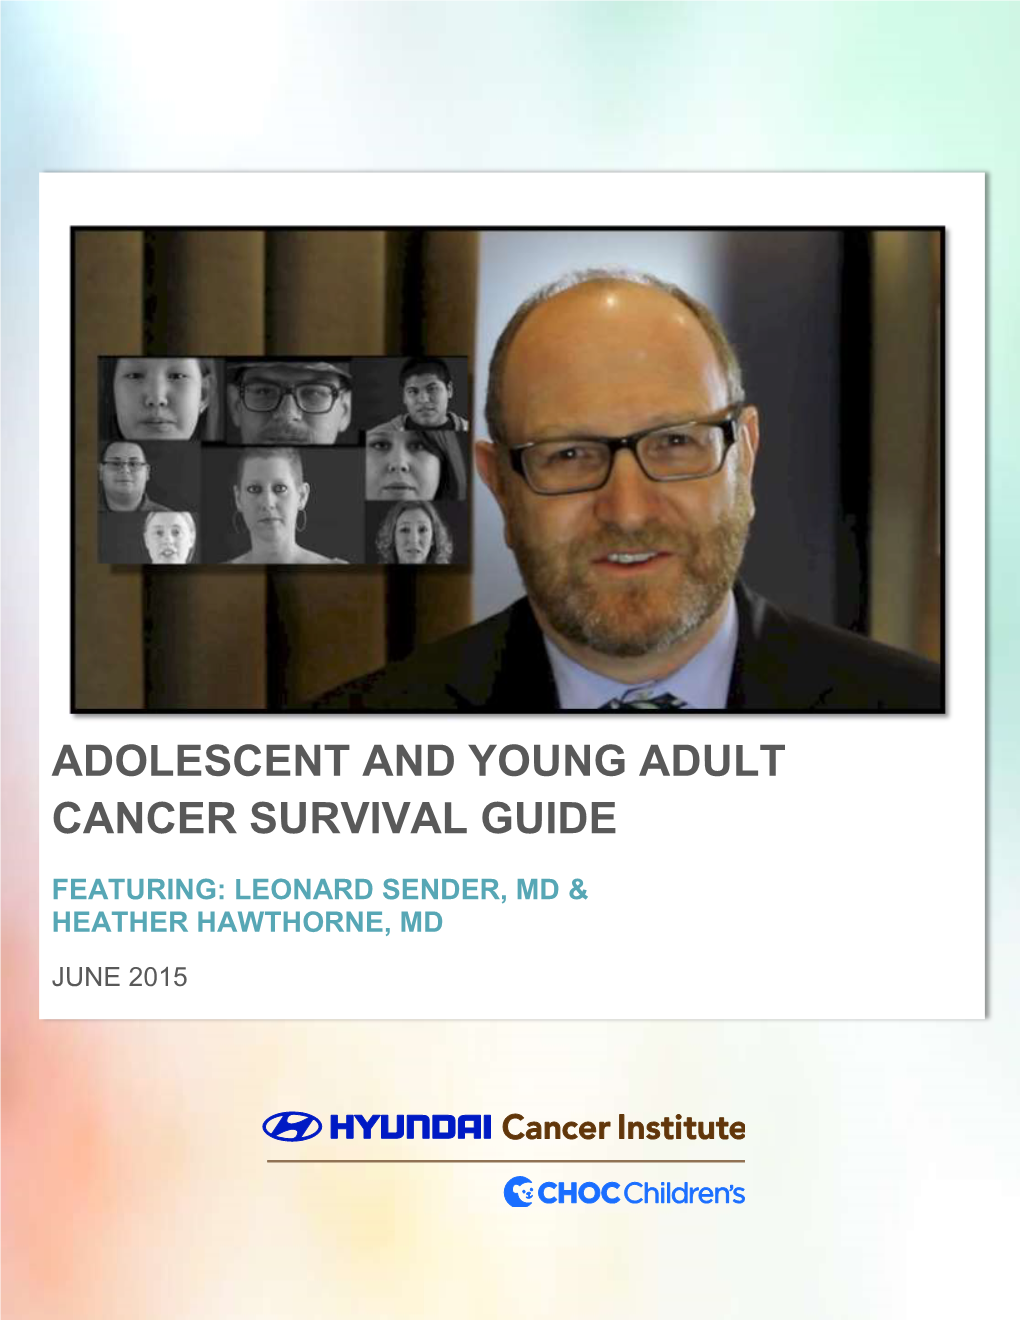 Adolescent and Young Adult Cancer Survival Guide